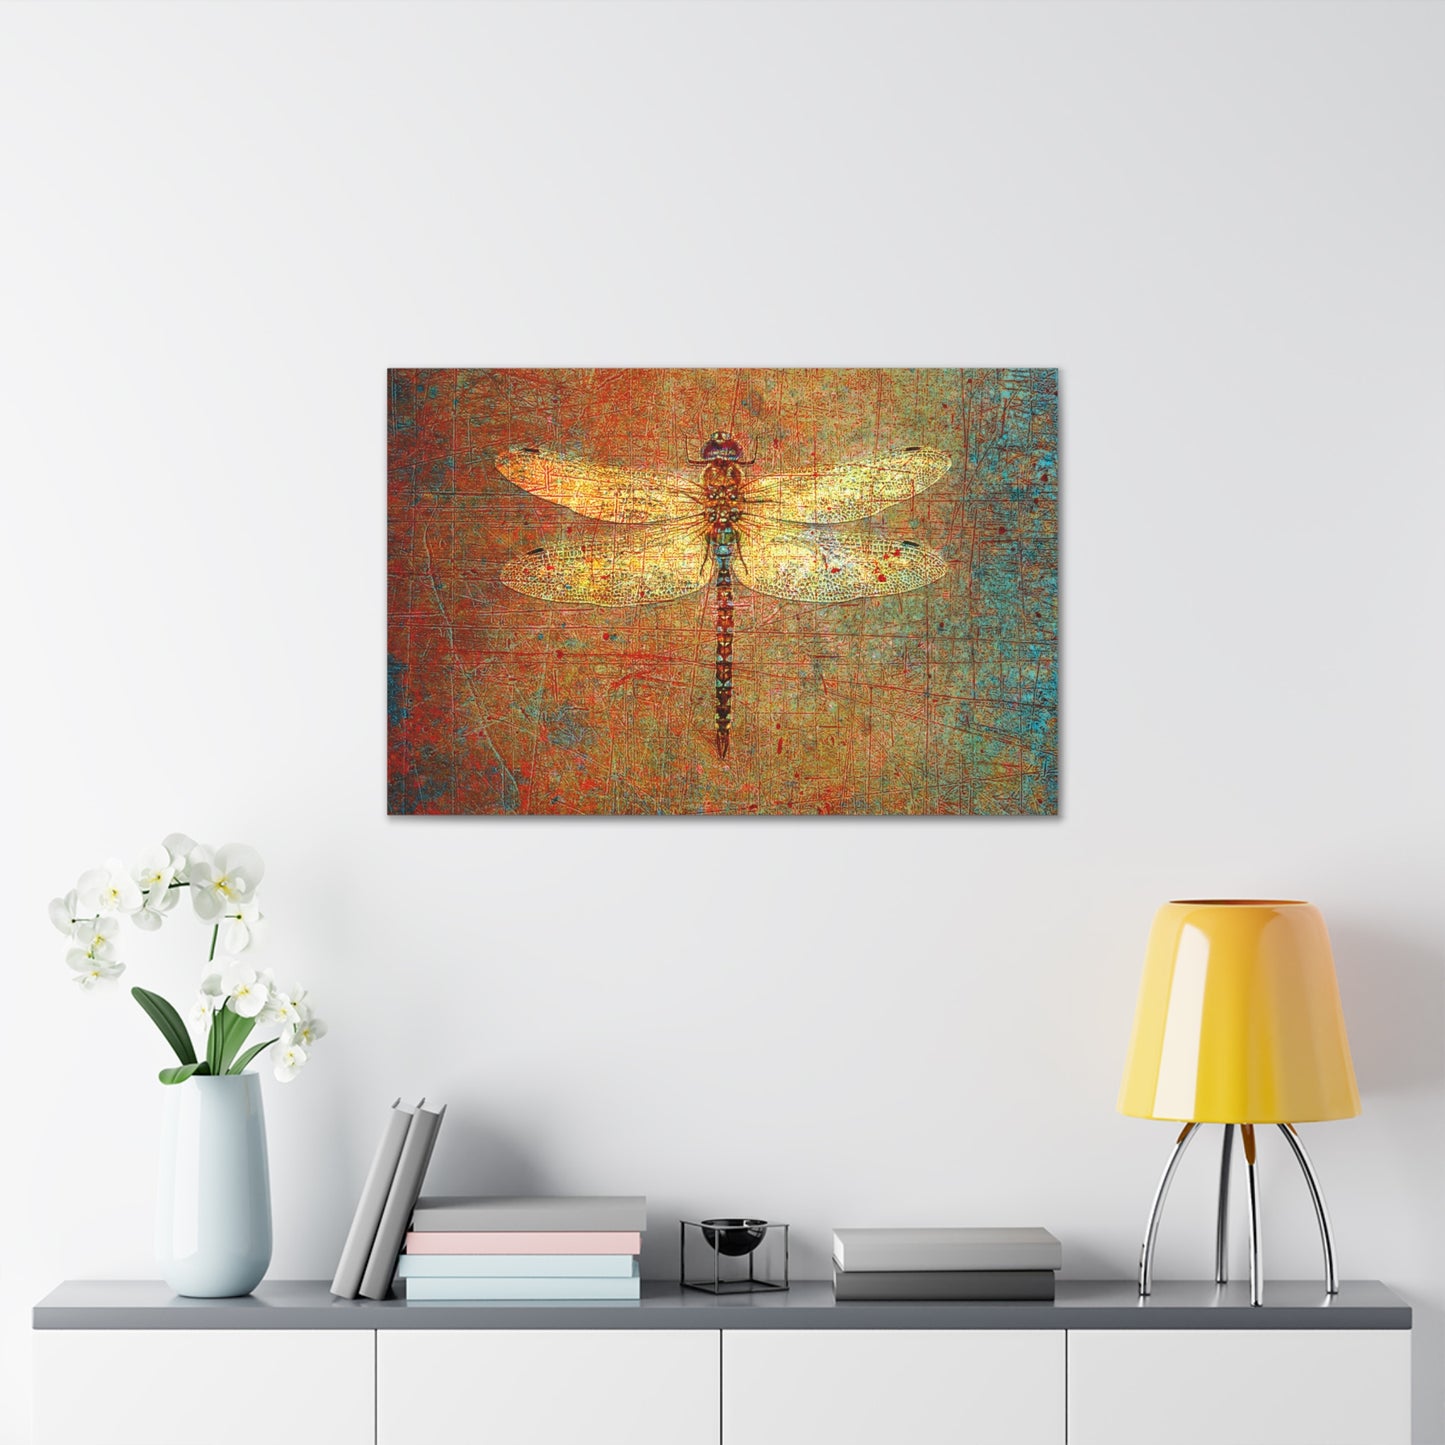 Golden Dragonfly on Distressed Orange and Green Background Print on Unframed Stretched Canvas 36x24